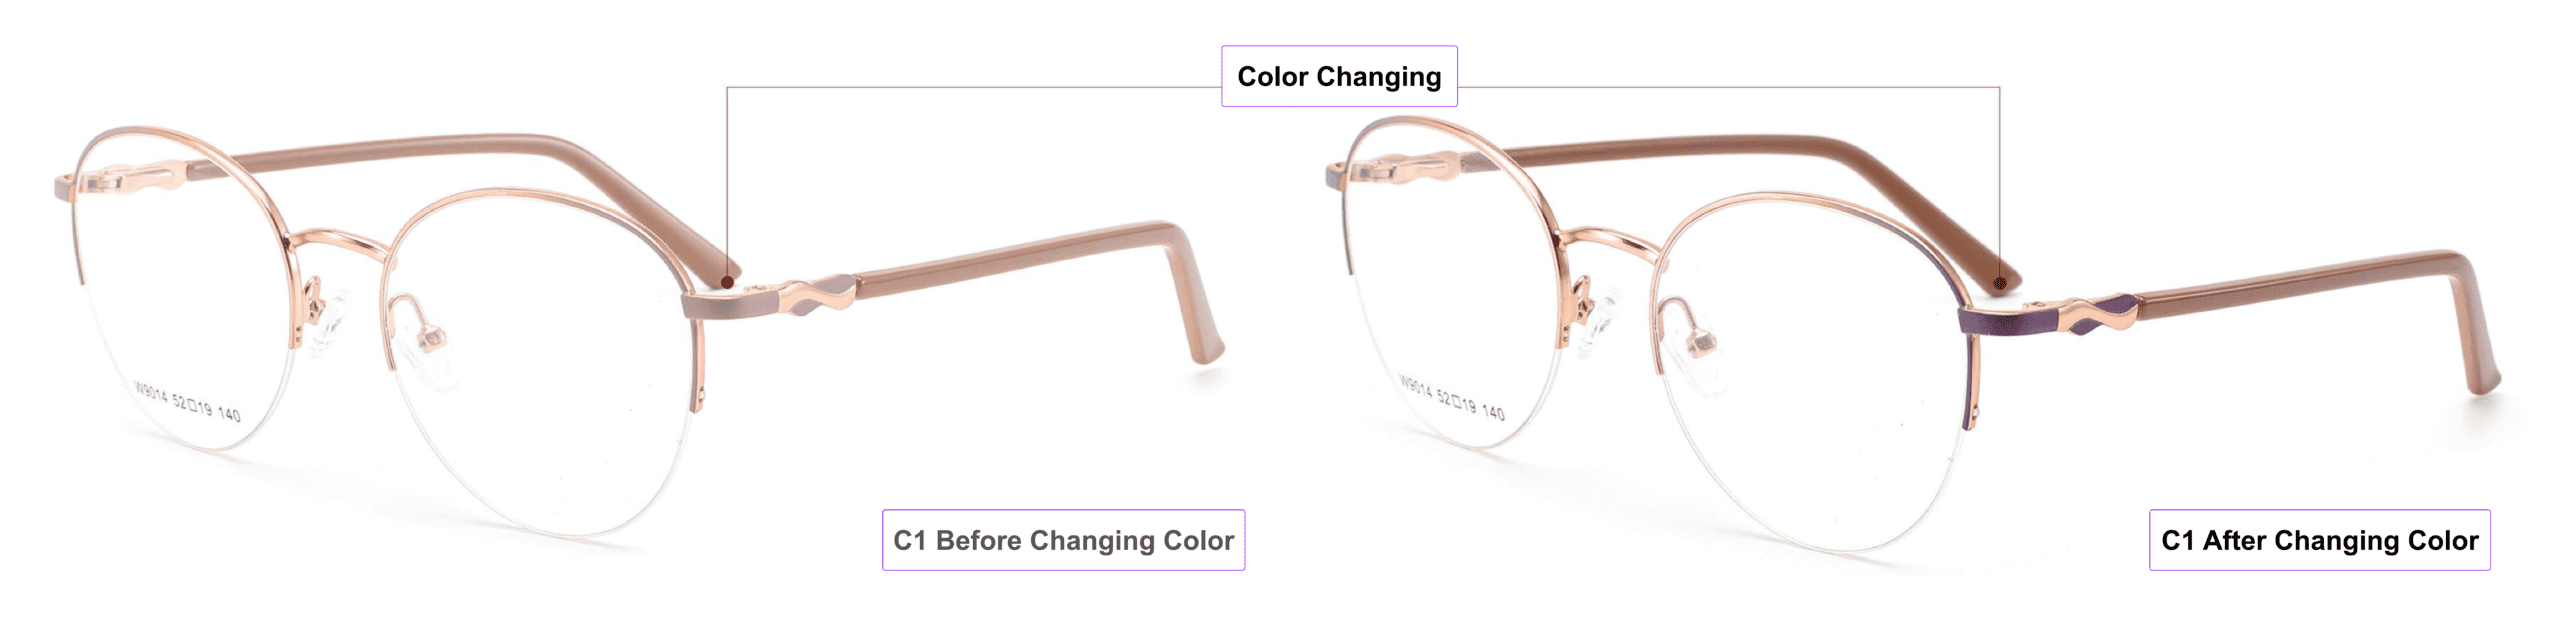 UV-activated Color Changing Glasses Frames, brown, purple, gold, process of color changing